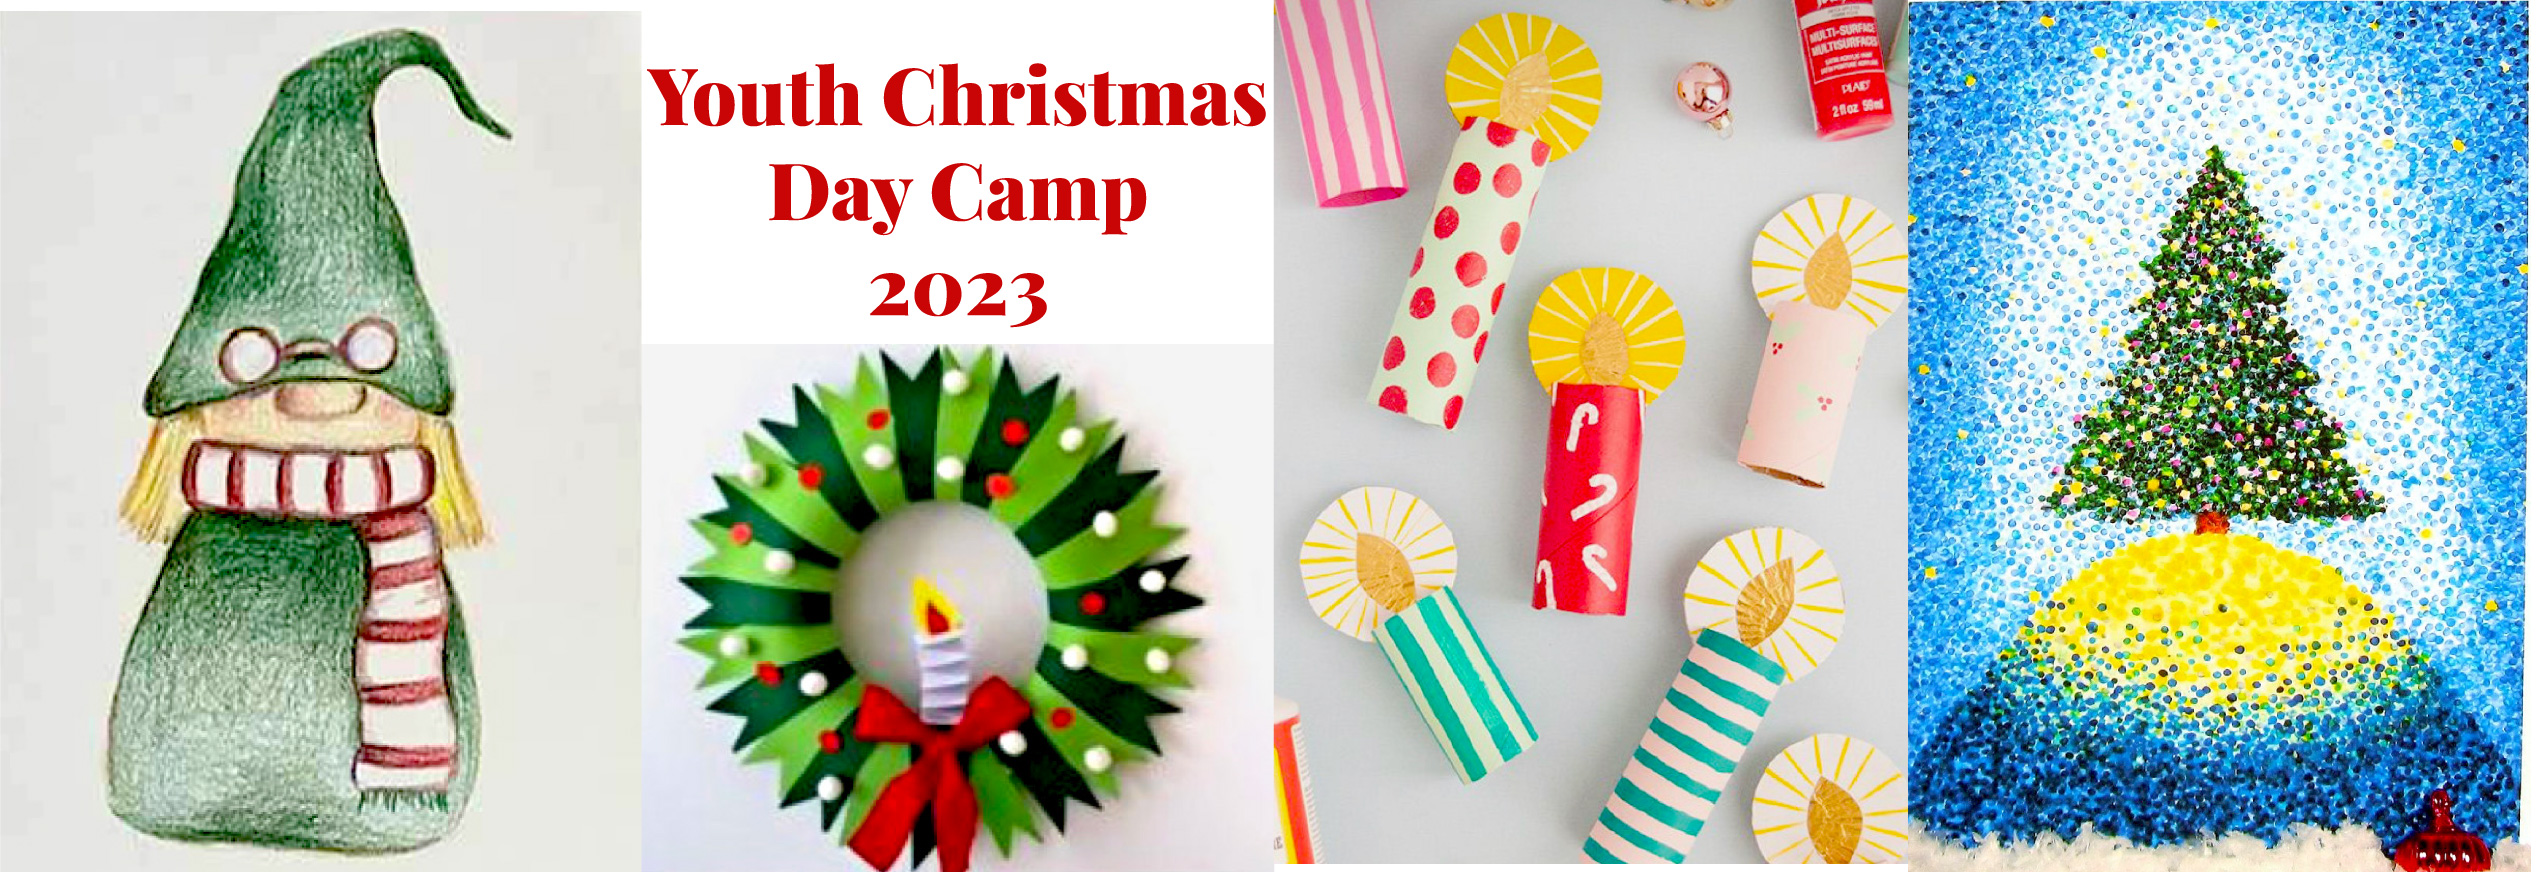 Youth Christmas Day Camp 2023 Projects